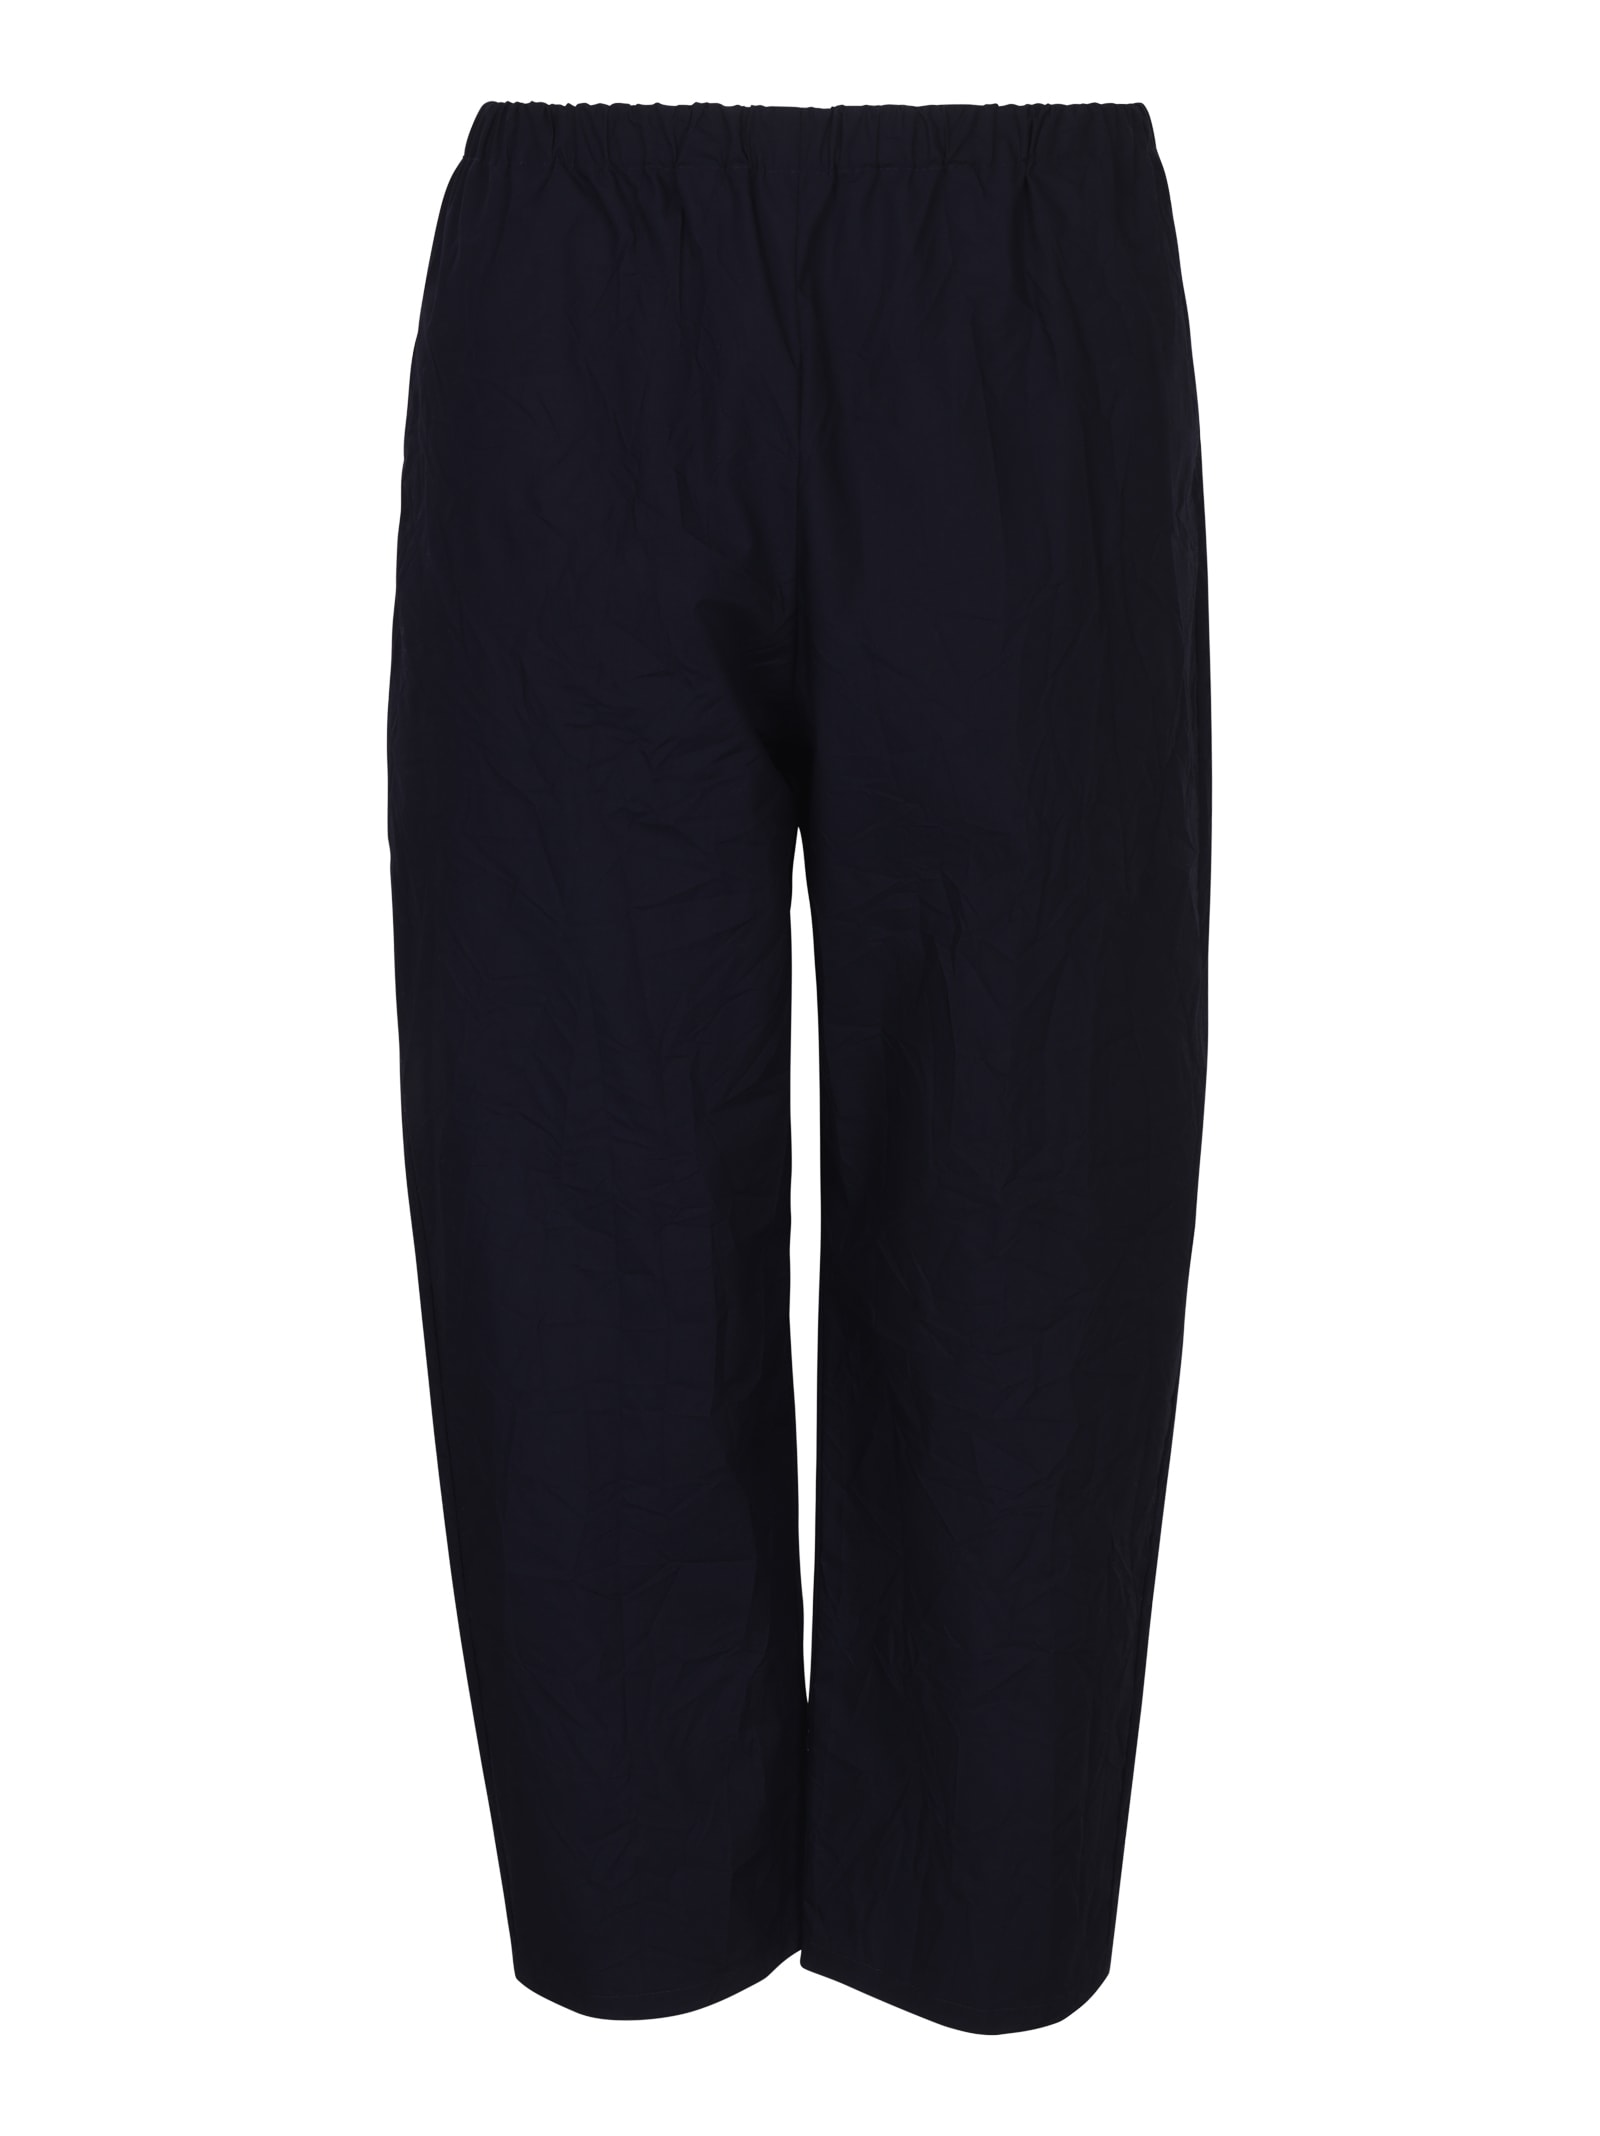 A PUNTO B RIBBED WAIST TROUSERS